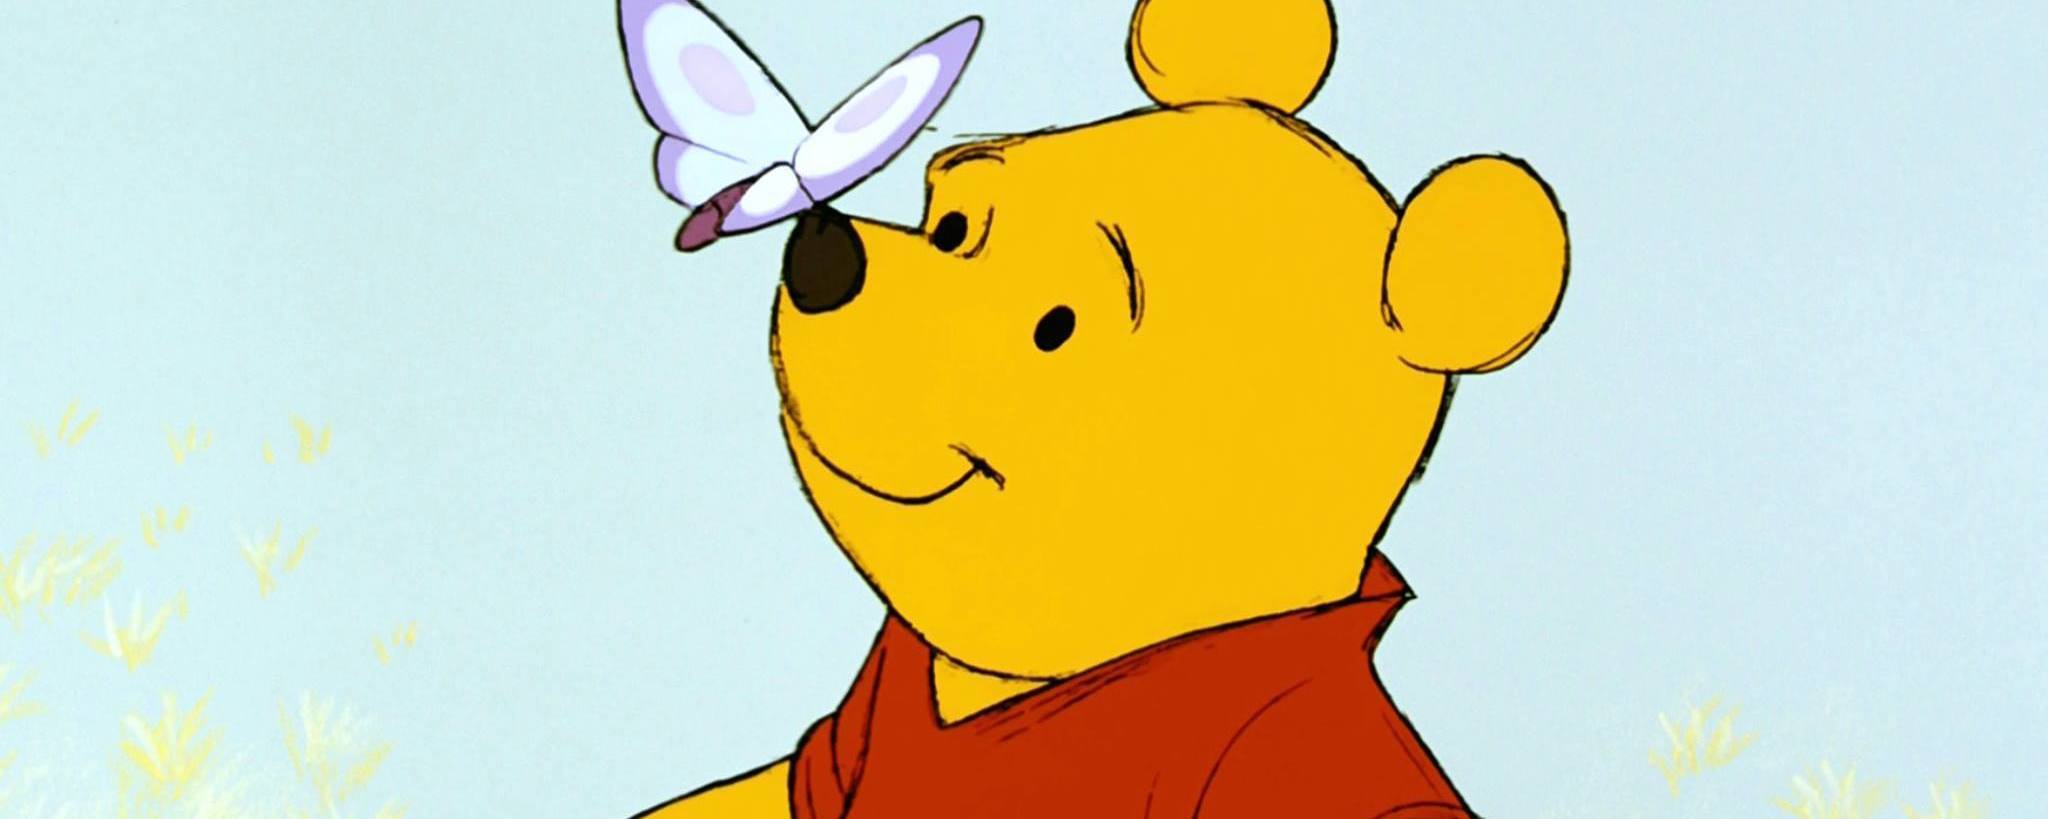 7 Winnie the Pooh Quotes to Make Your Day - Disney News